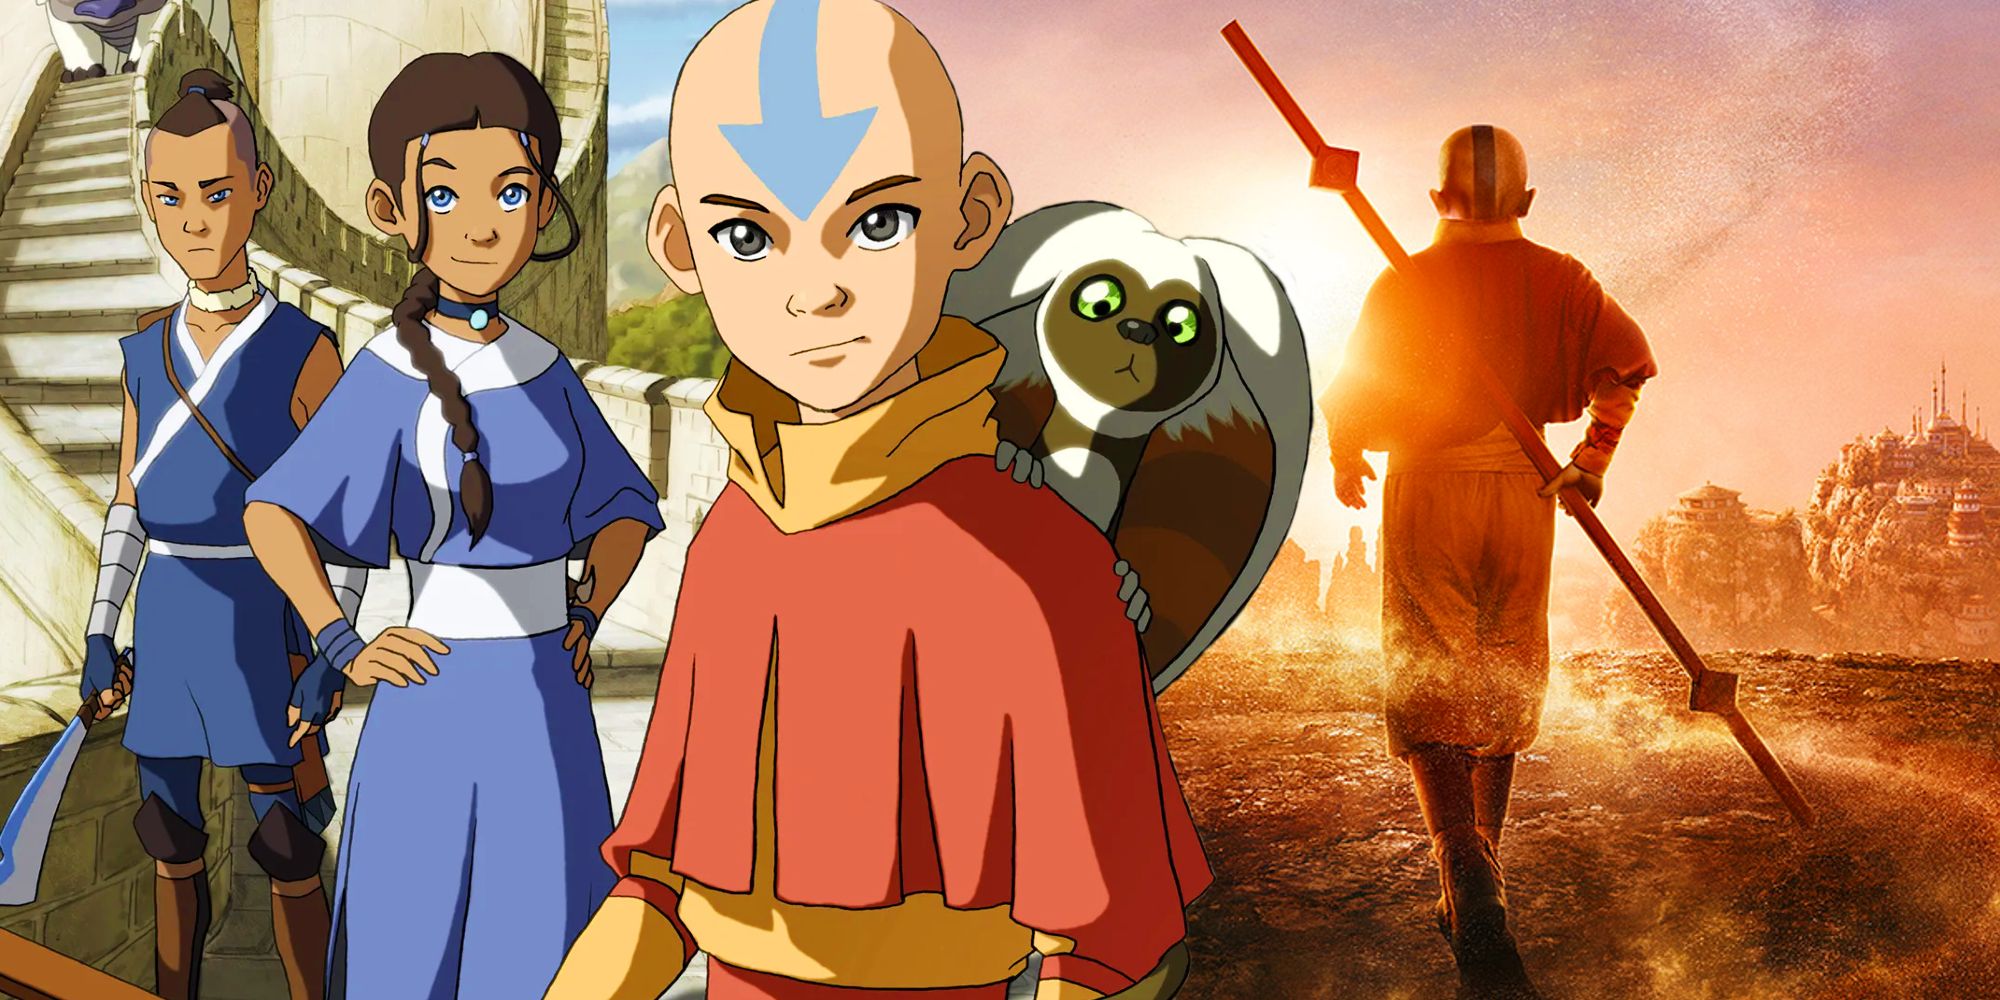 Aang in the poster for Netflix's Avatar: The Last Airbender next to the poster for the original show